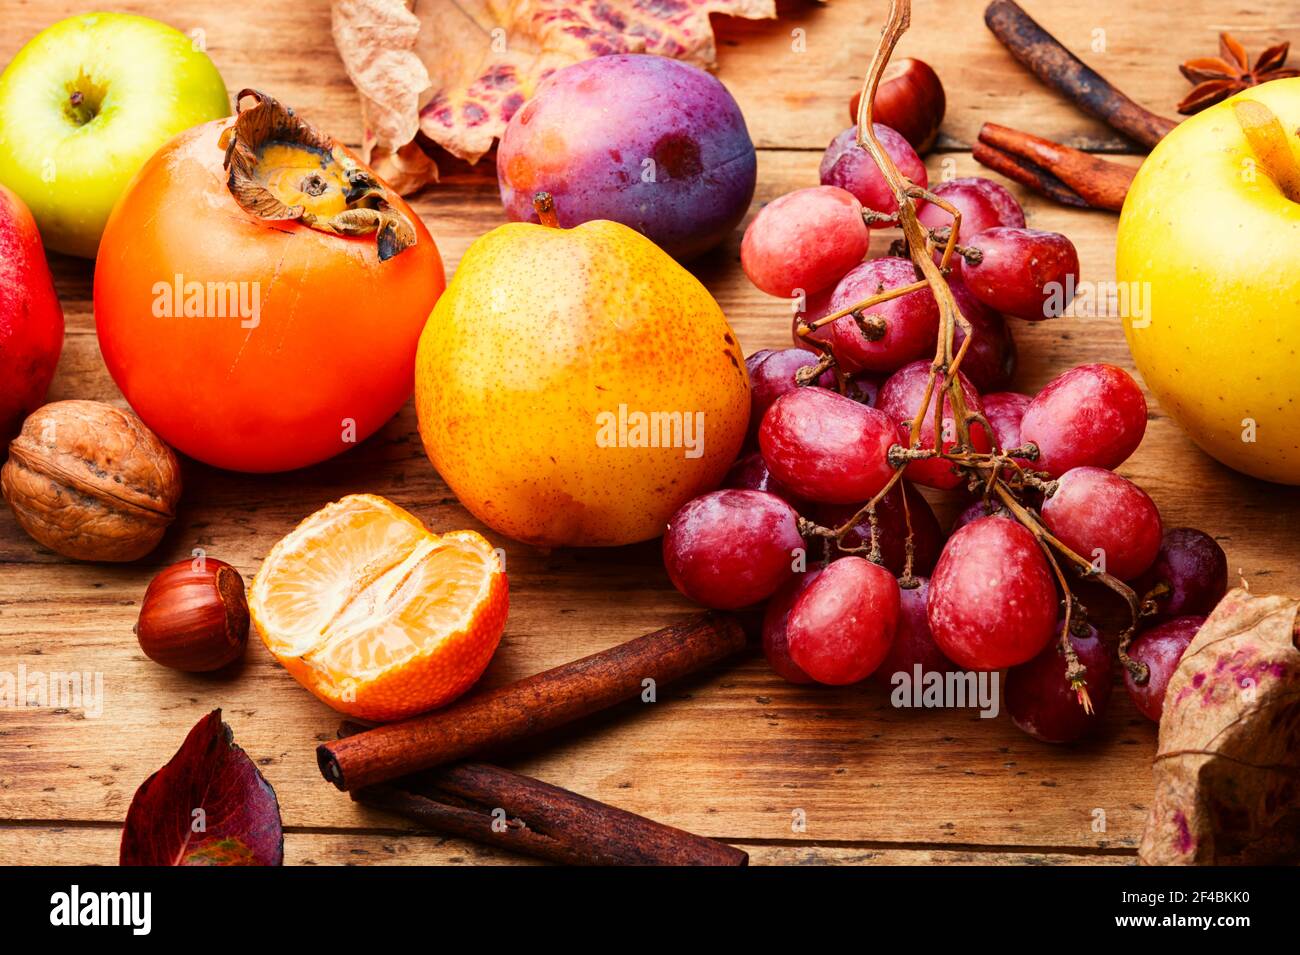 Assortment of fruits,grapes and nuts.Autumn fruits.Autumn seasonal harvest Stock Photo